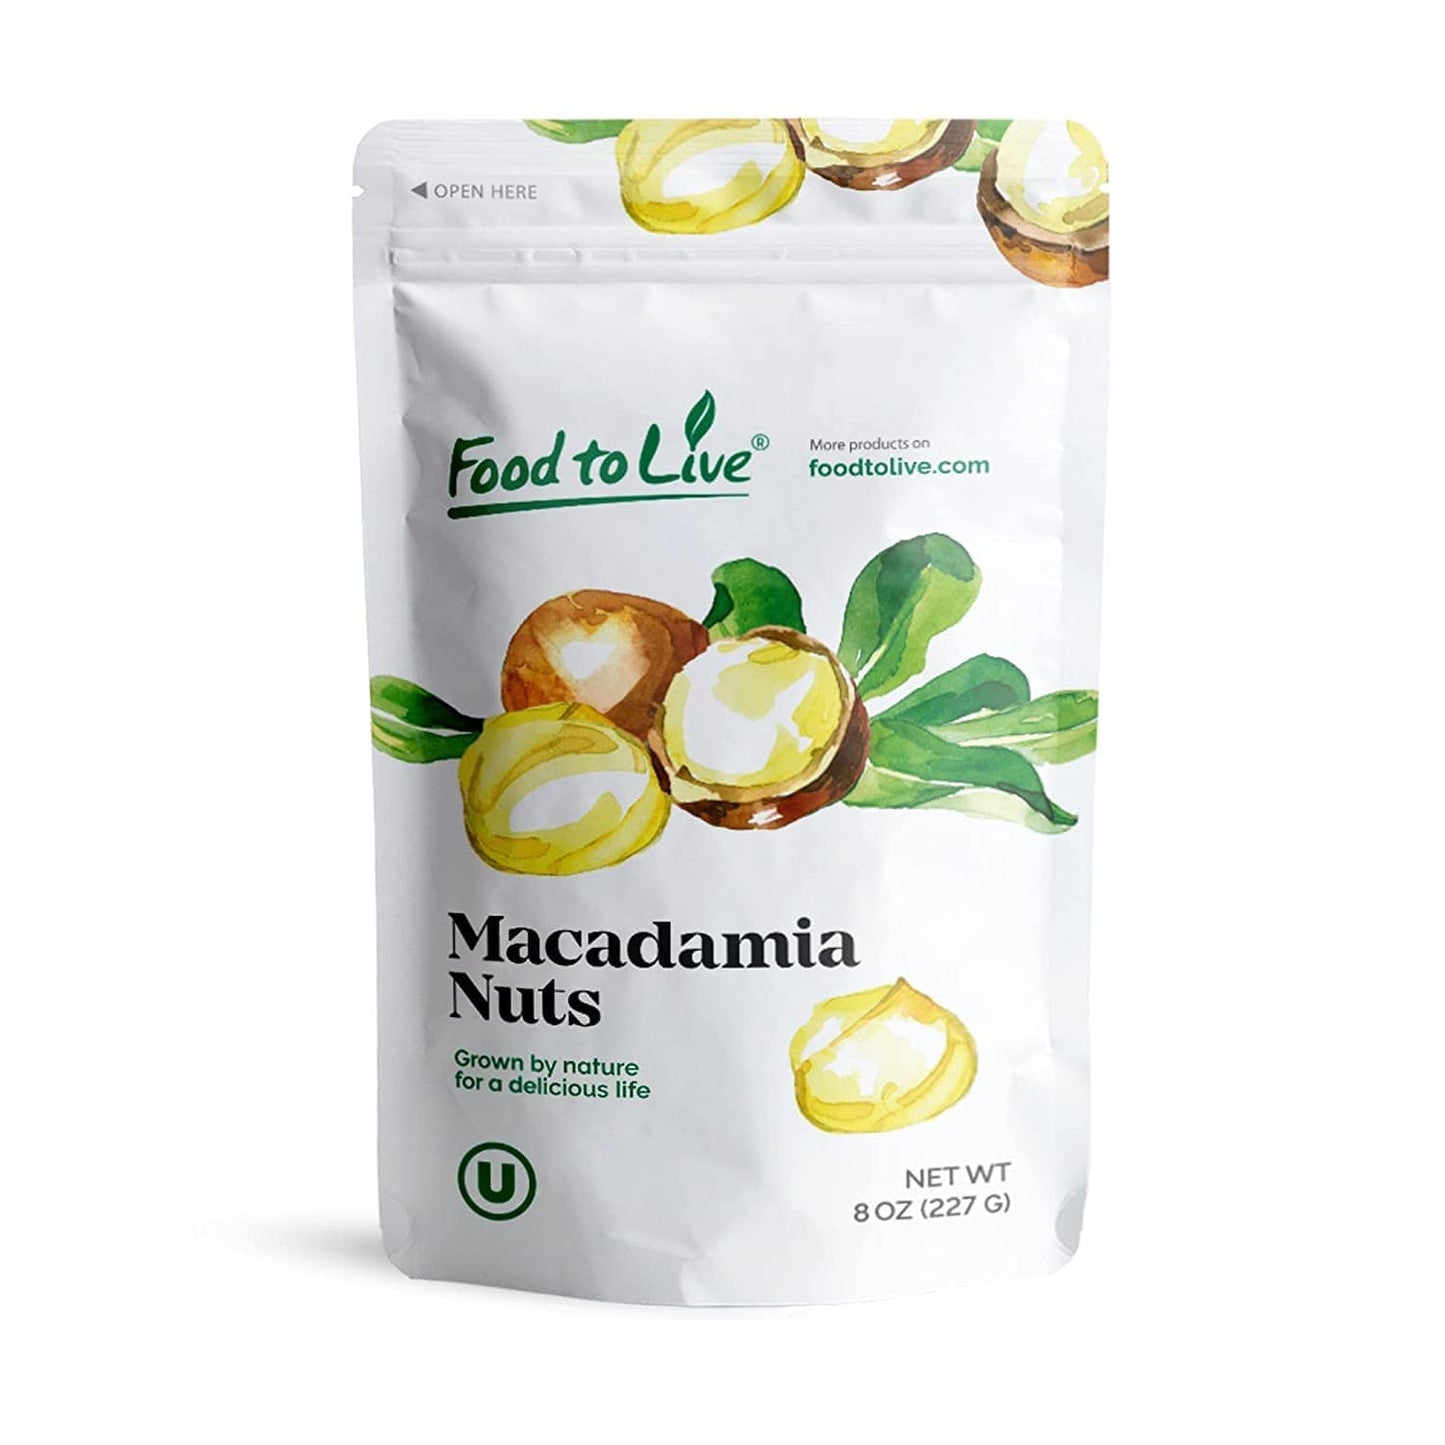 Macadamia Nut Pieces - Raw, Unsalted, Unroasted, Keto Friendly, Kosher, Vegan, Bulk, Great as Snack and for Baking, Good Source of Manganese, Thiamin, and Copper